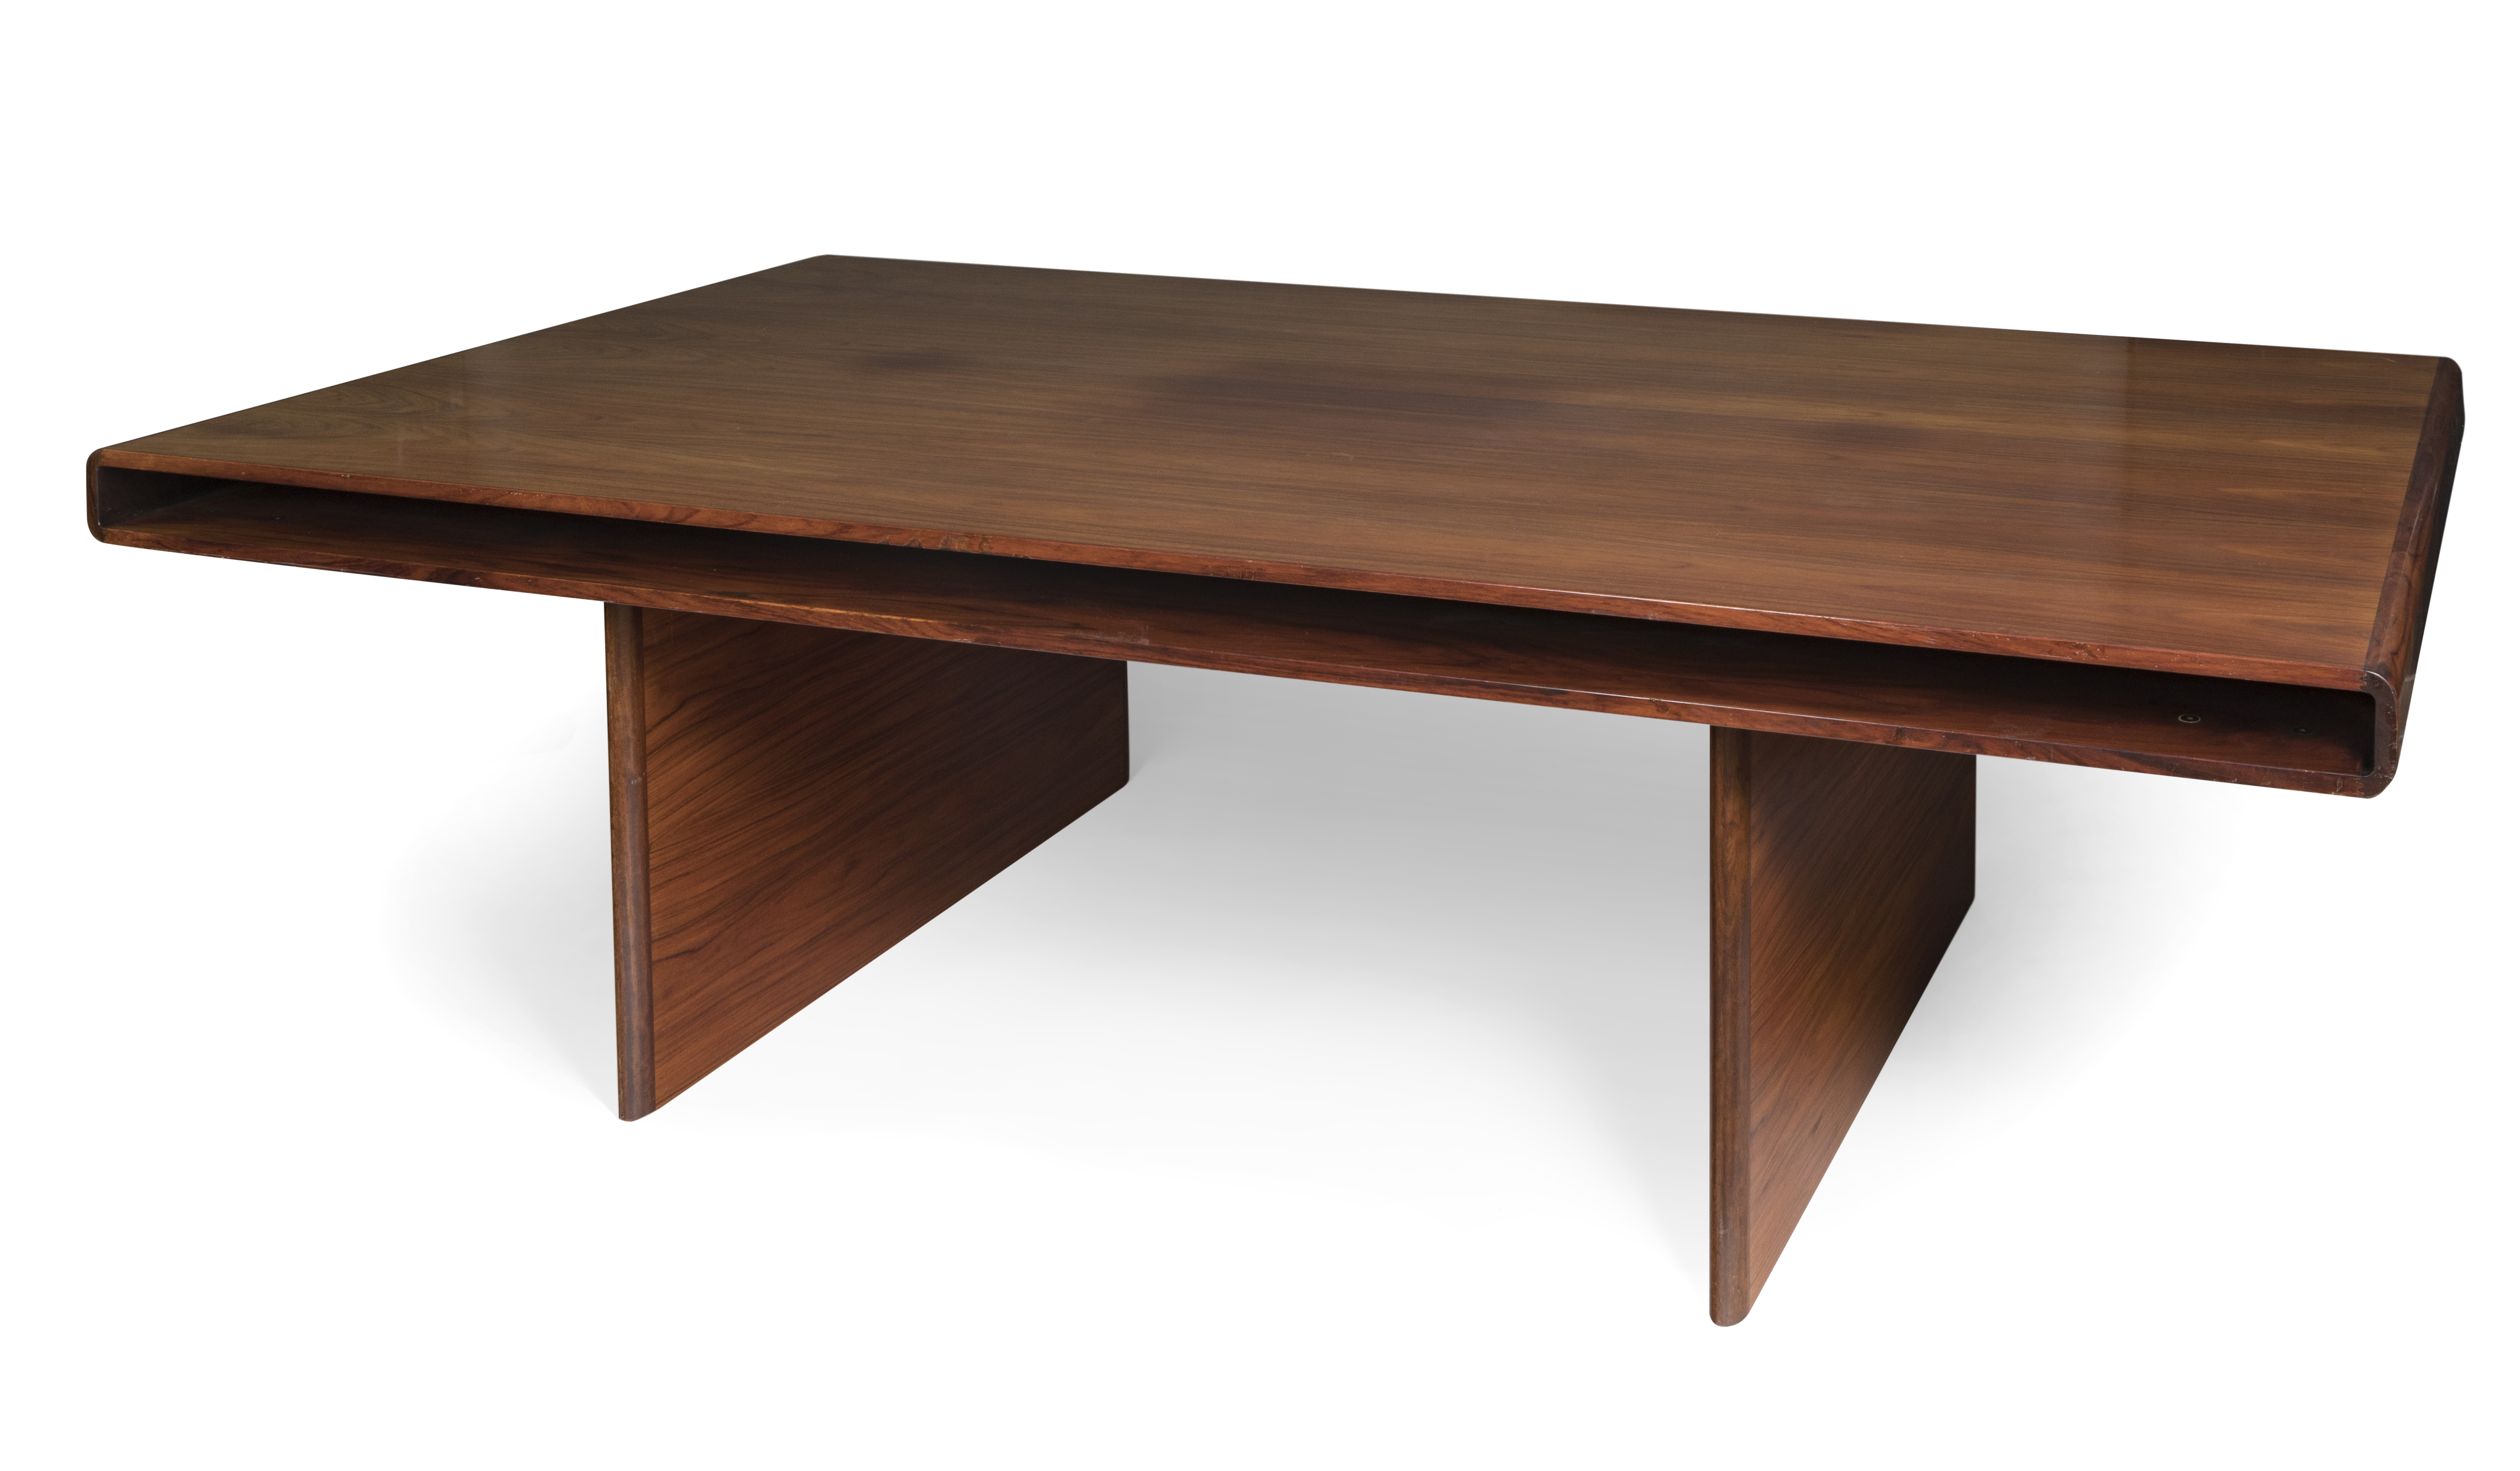 DYRLUND conference table. Denmark, mid-20th century. Rosewood. Measurements: 73 x 250 x 125 cm.